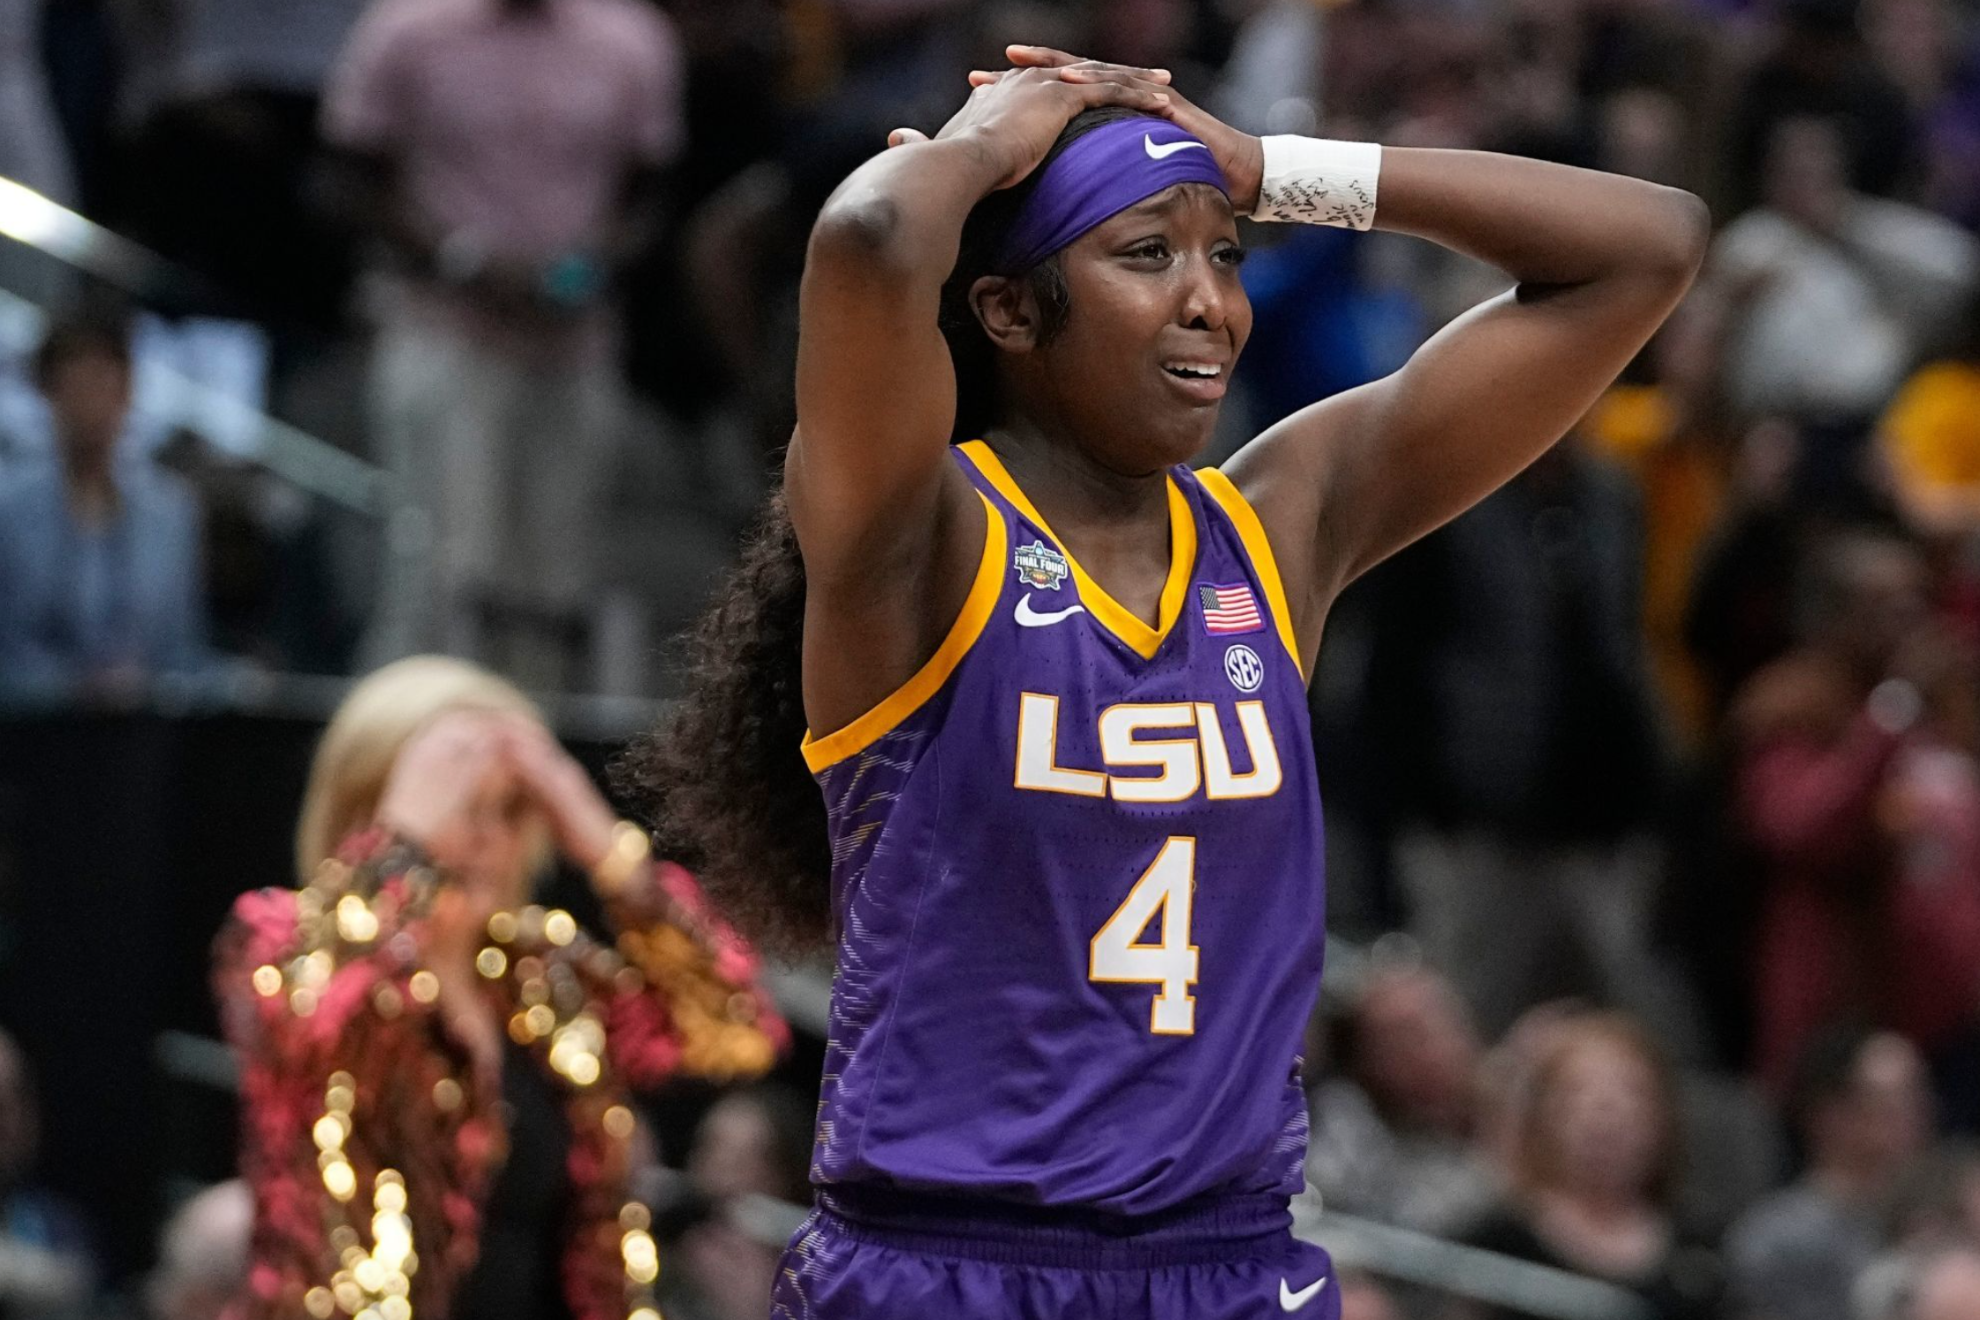 Flaujae Johnson boasts of consolation gift after failing to win with LSU: Heres what her expensive new Mercedes looks like